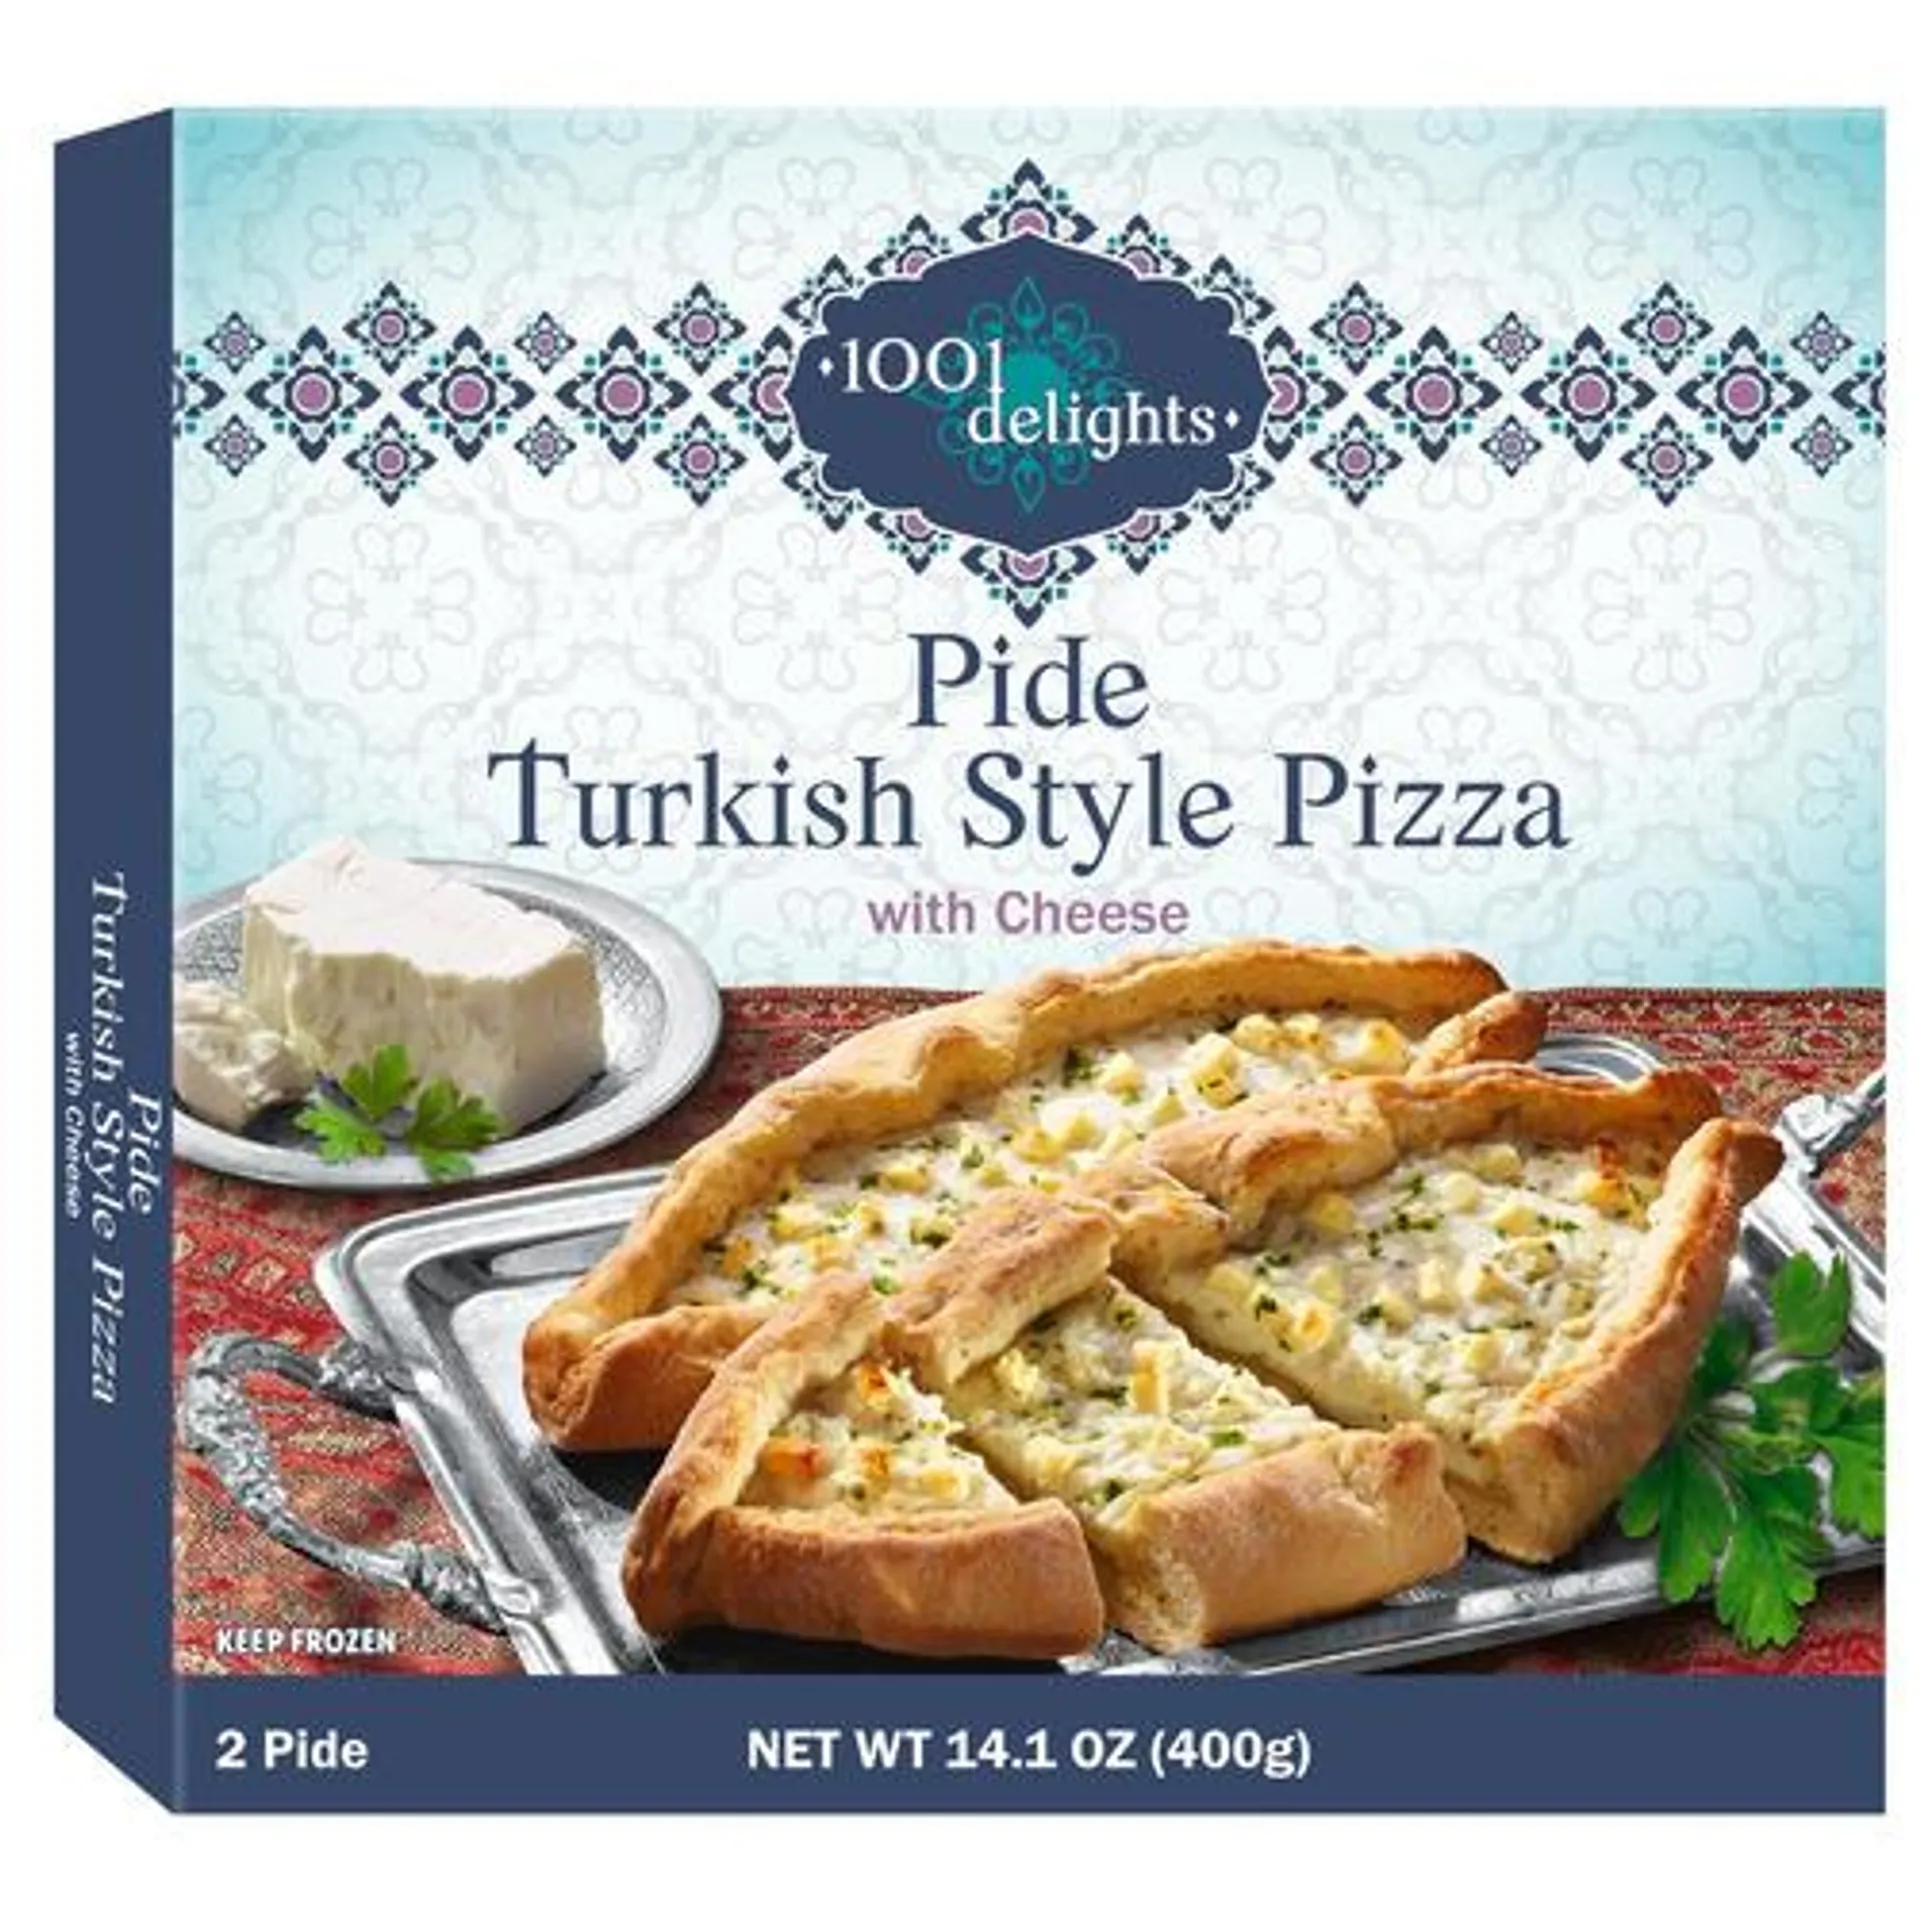 1001 delights frozen pide Turkish style pizza with cheese